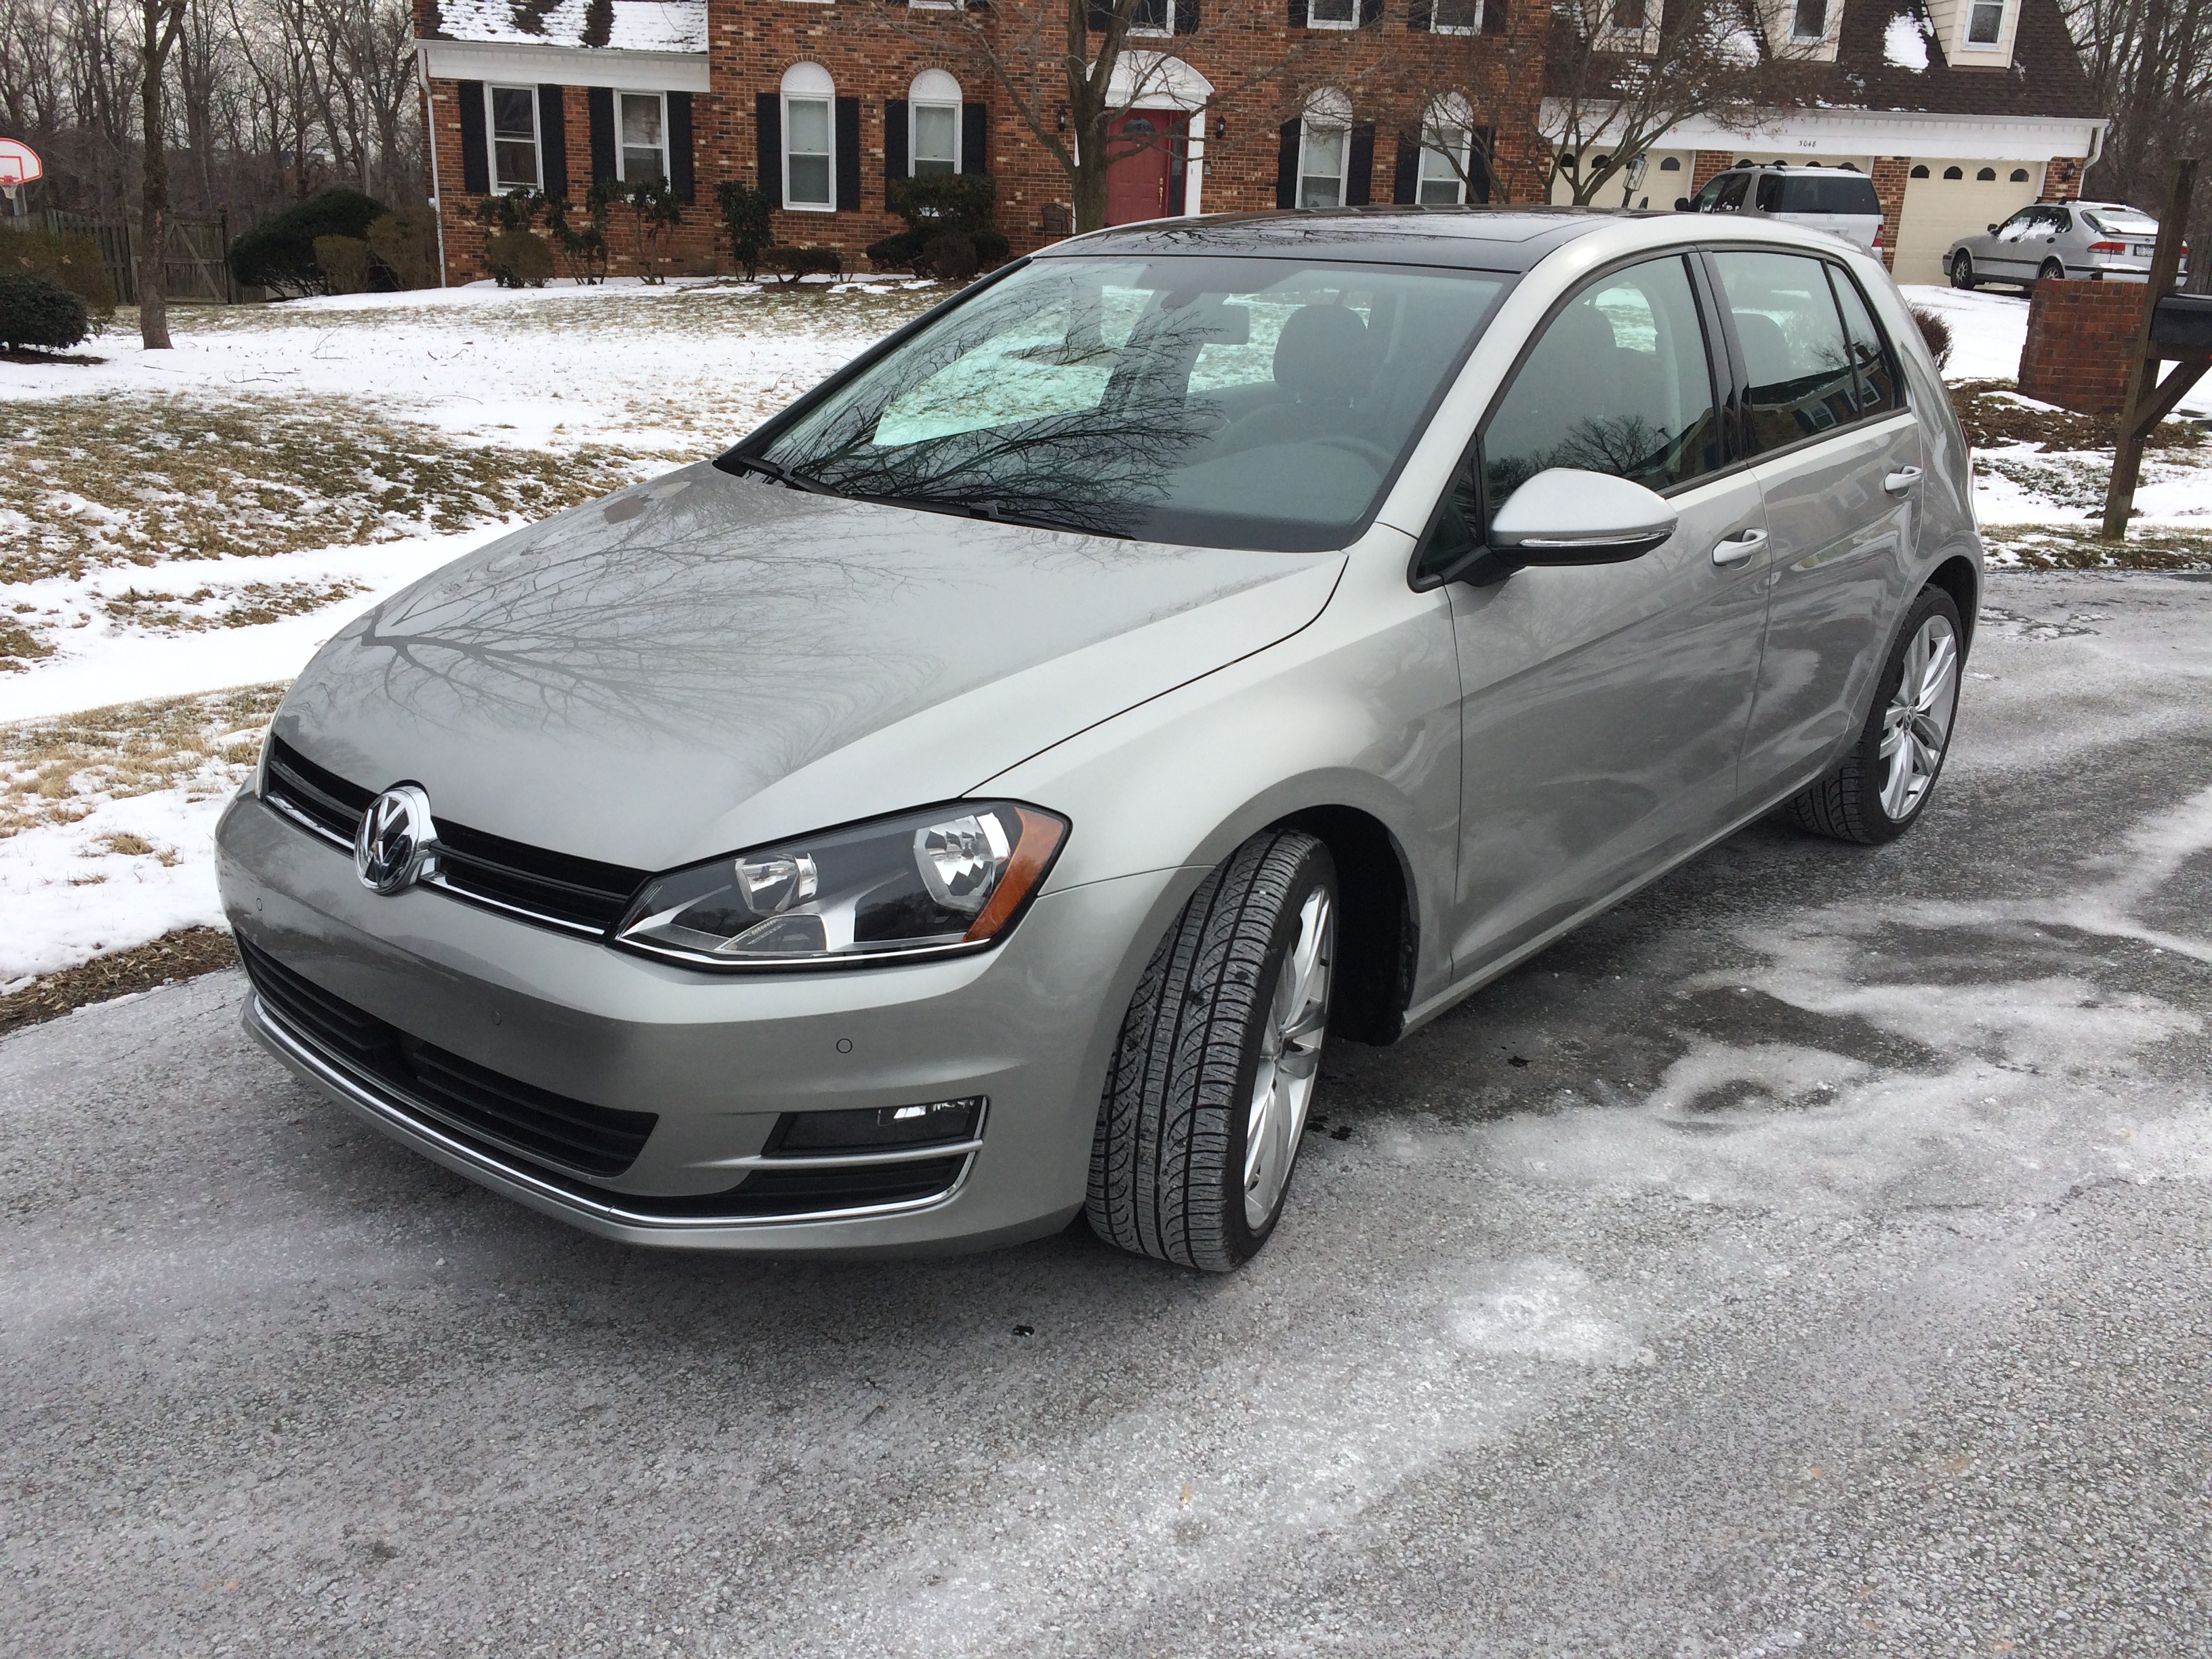 Car Report: Redesigned VW Golf lives up to hype